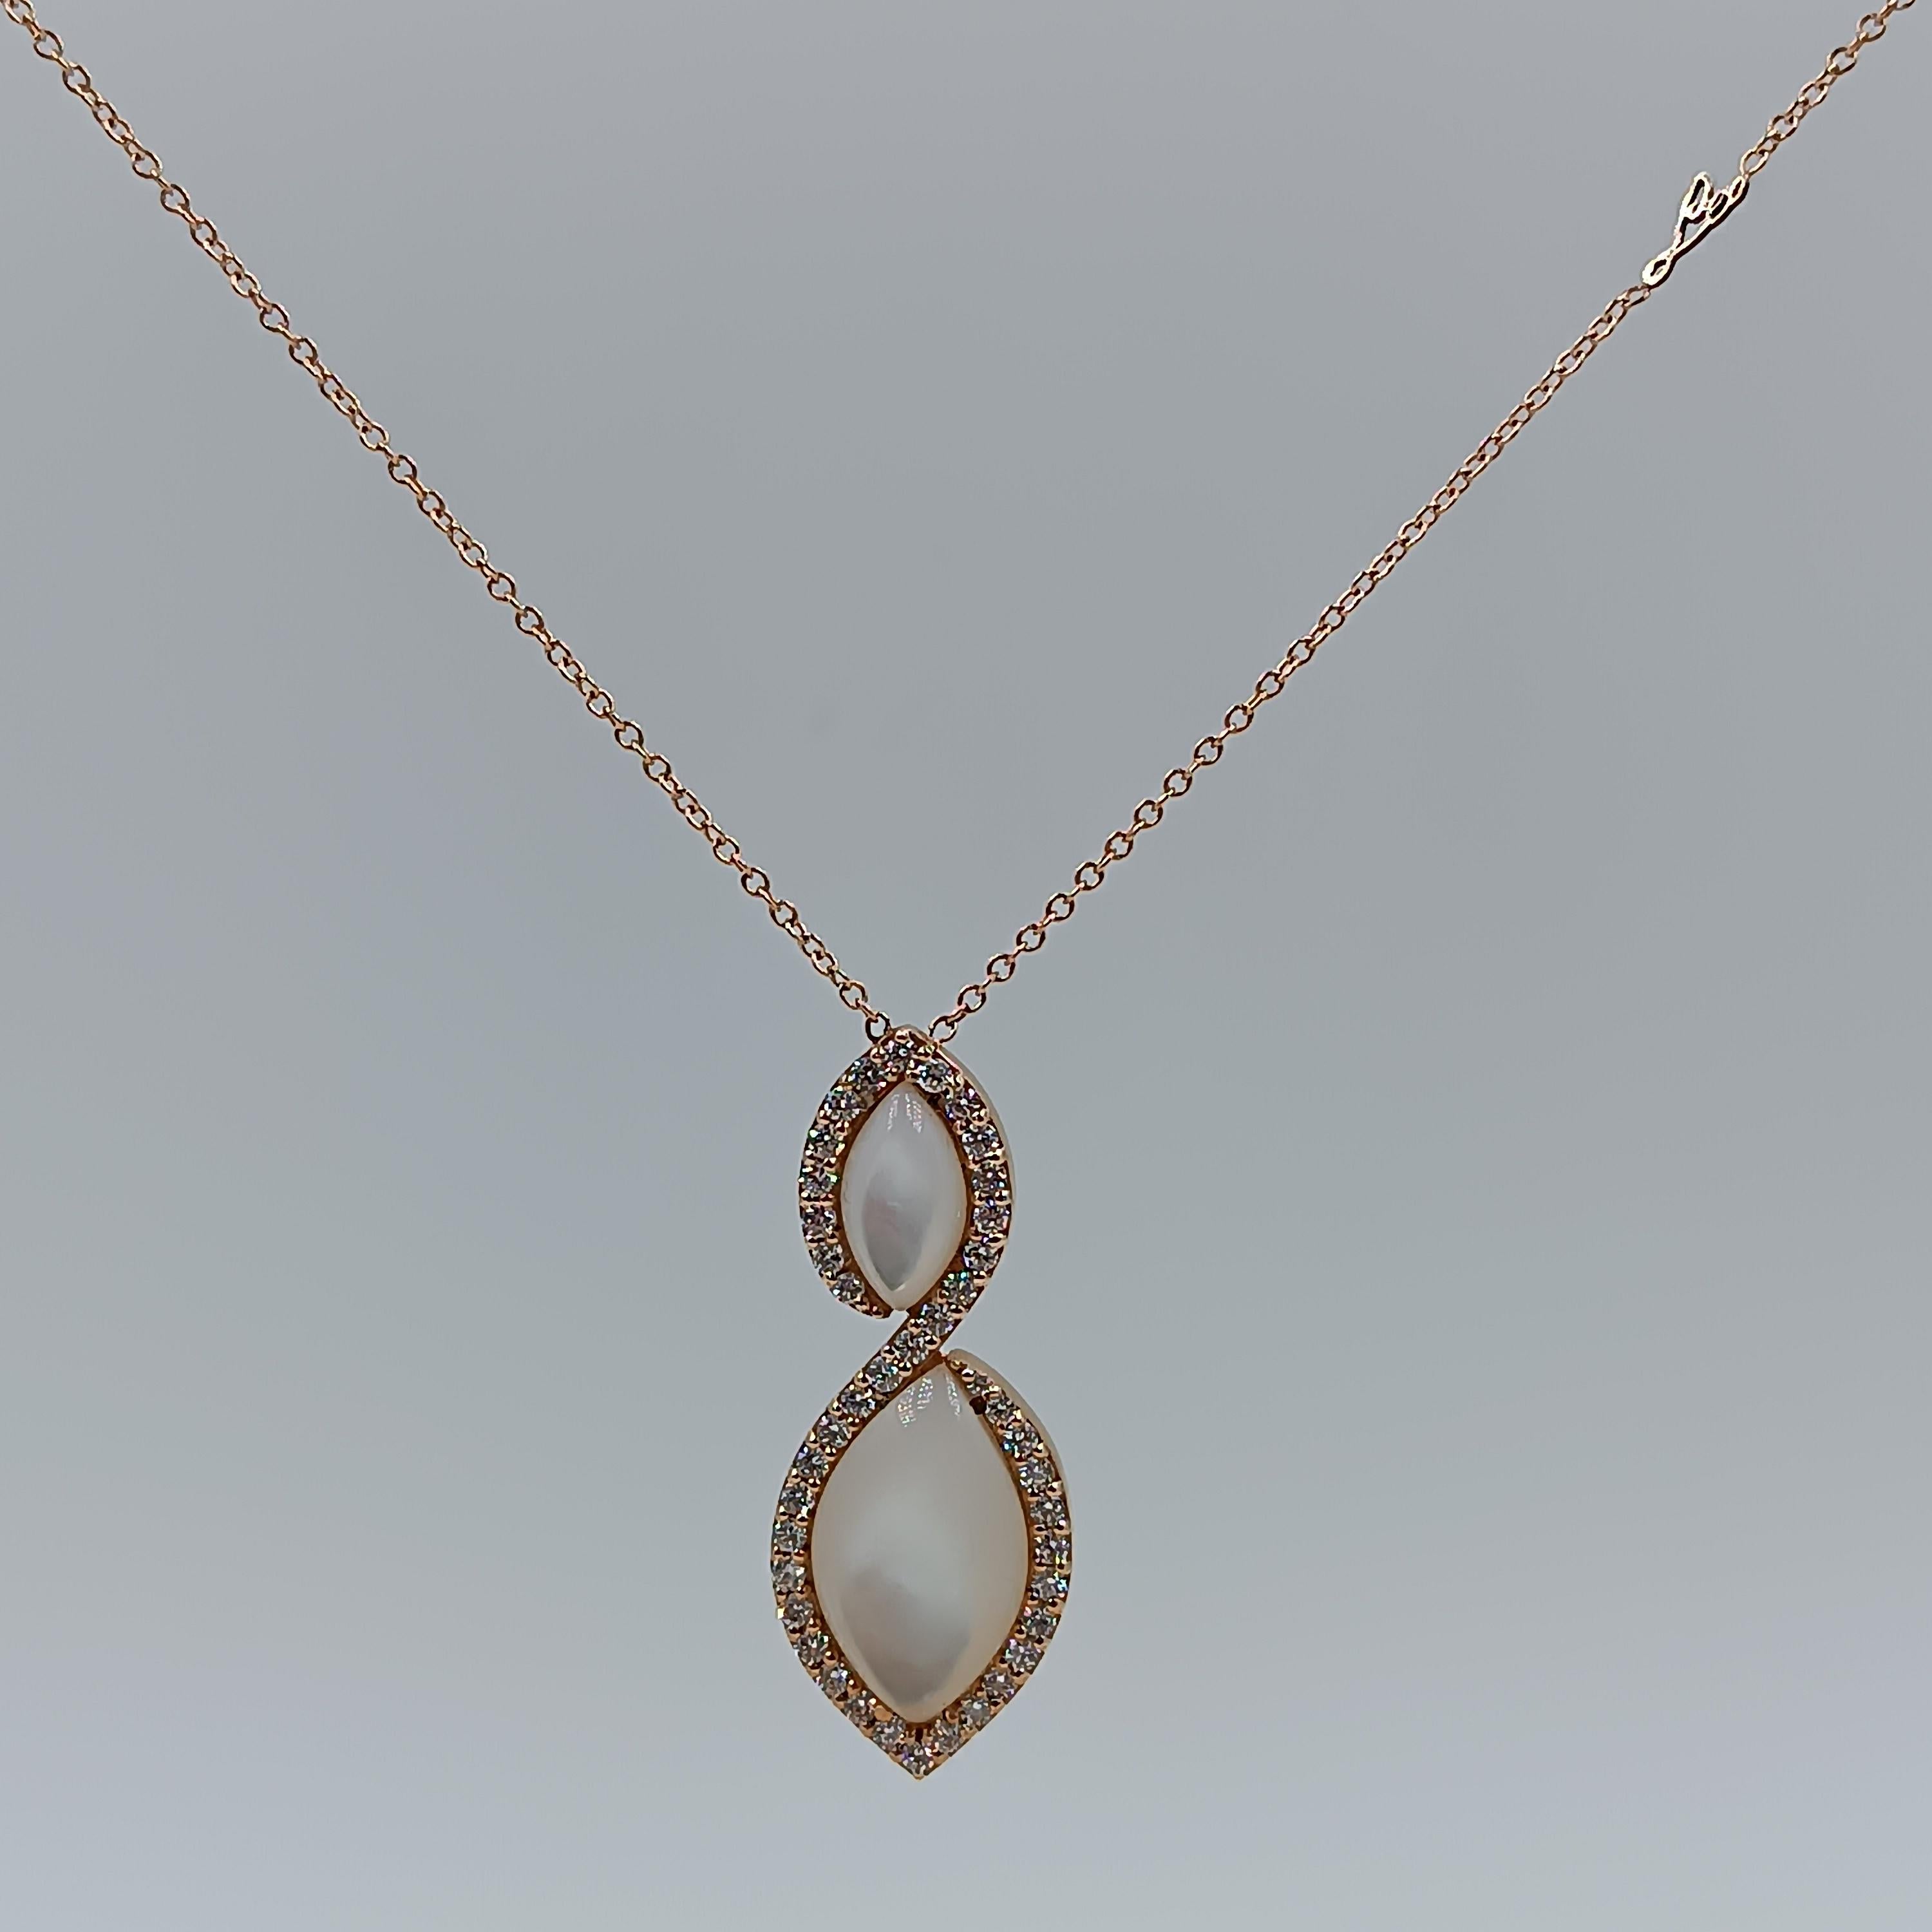 This wonderful Leo Milano pendant from our Pagano collection shows in every detail a very complicate yet perfectly done workmanship. The pendant and the chain are in 18 carat rose gold with a mother of pearl . The object weights 12.67 grams the